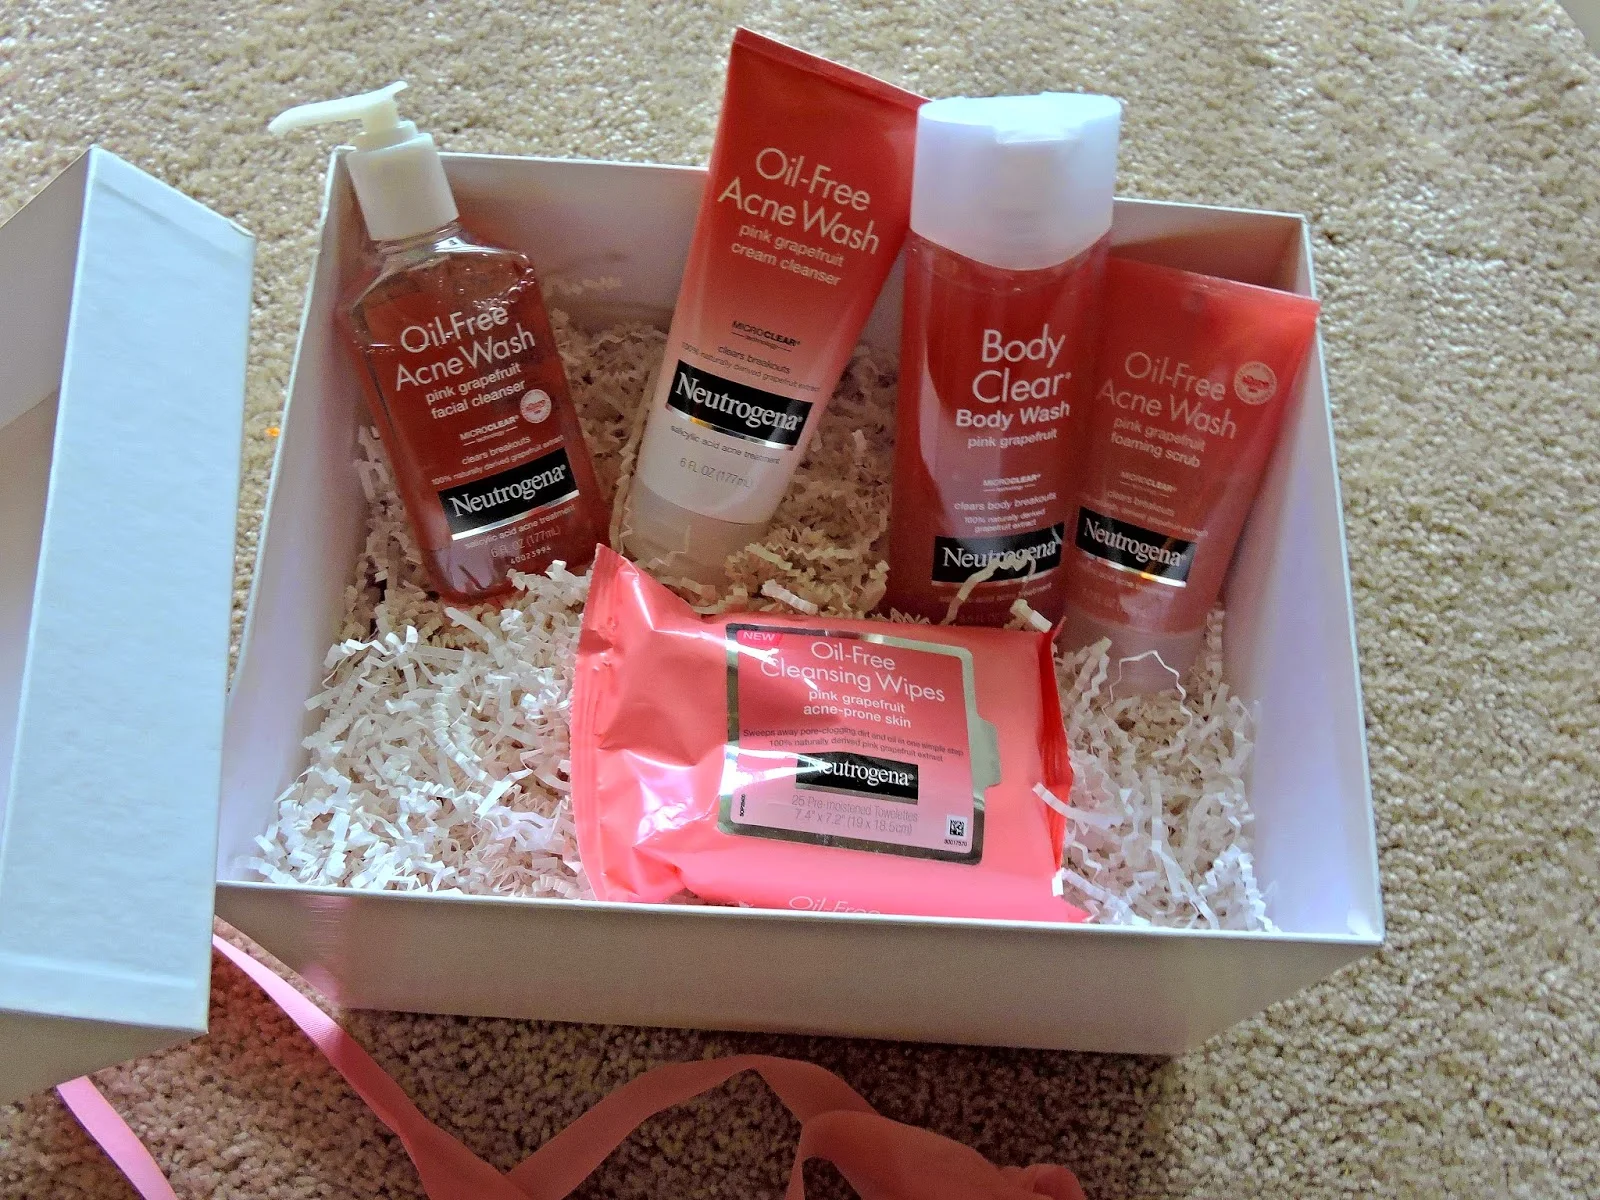 Neutrogena Oil-Free Acne Wash Pink Grapefruit Skincare Products Review and Giveaway Ends 9/18 #NeutrogenaSelfie #UnseenAcne via www.Productreviewmom.com